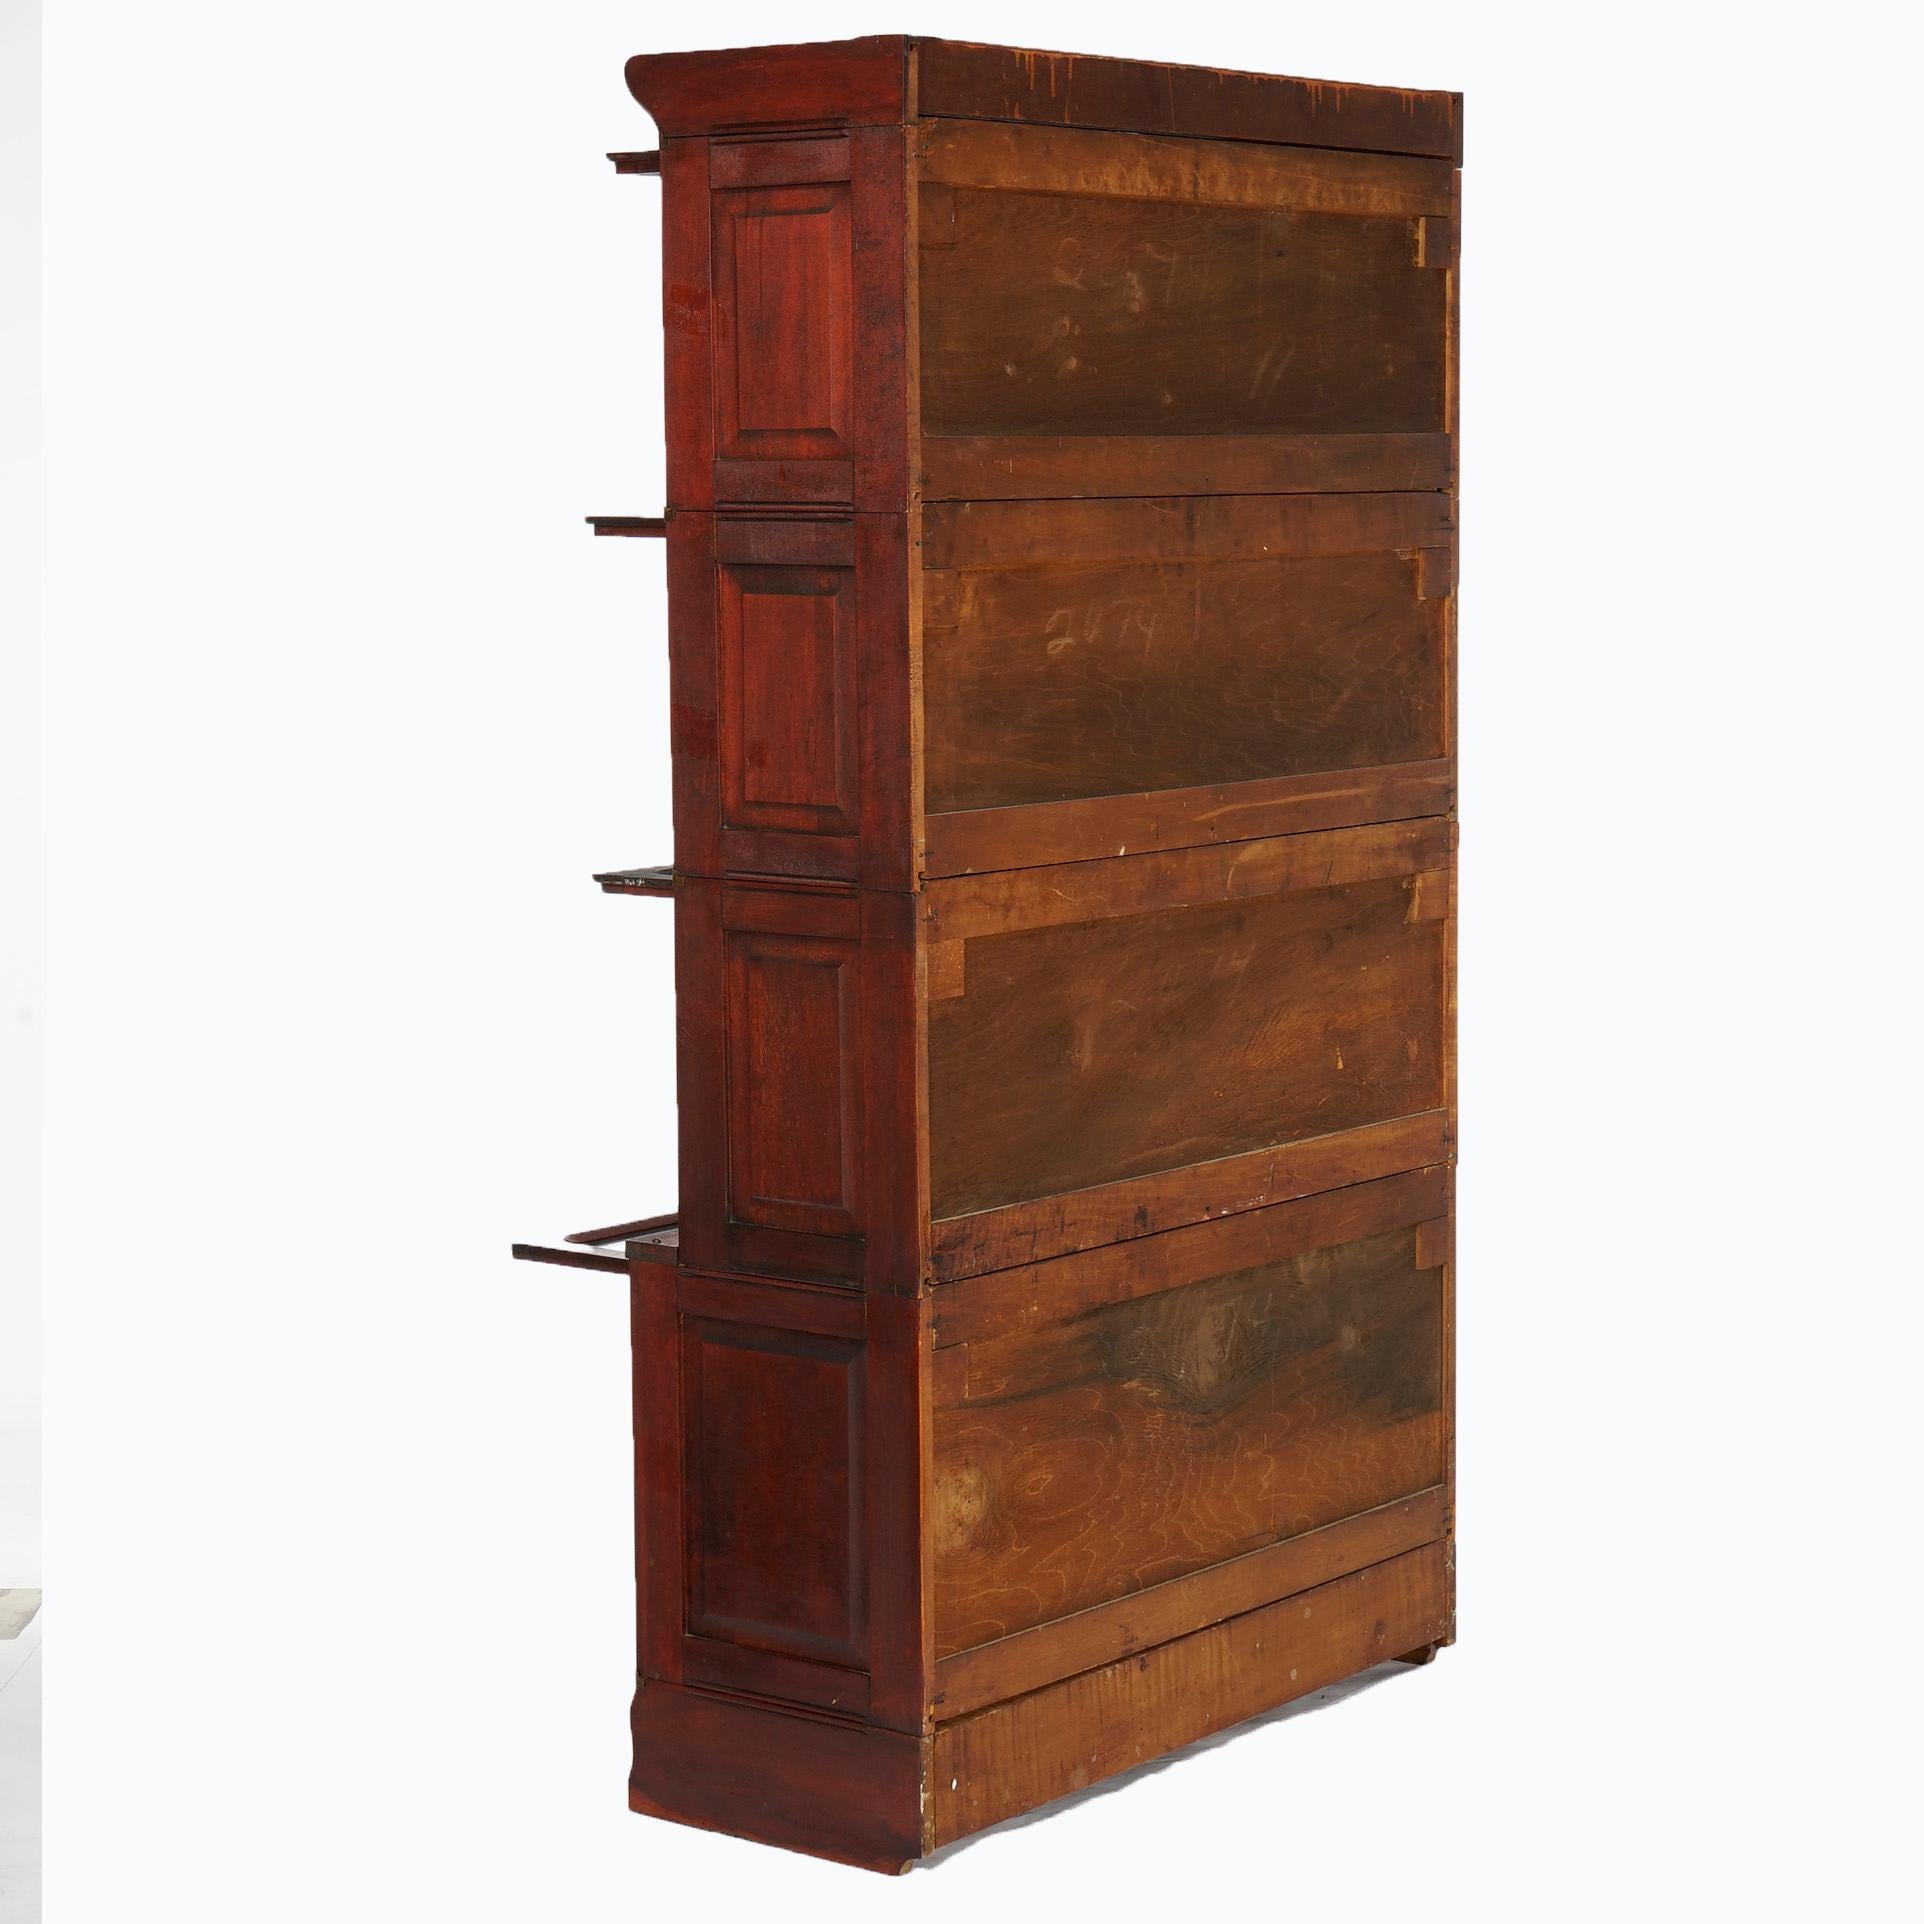 American Antique Arts & Crafts Mahogany Barrister Bookcase with Raised Panels, c1910 For Sale